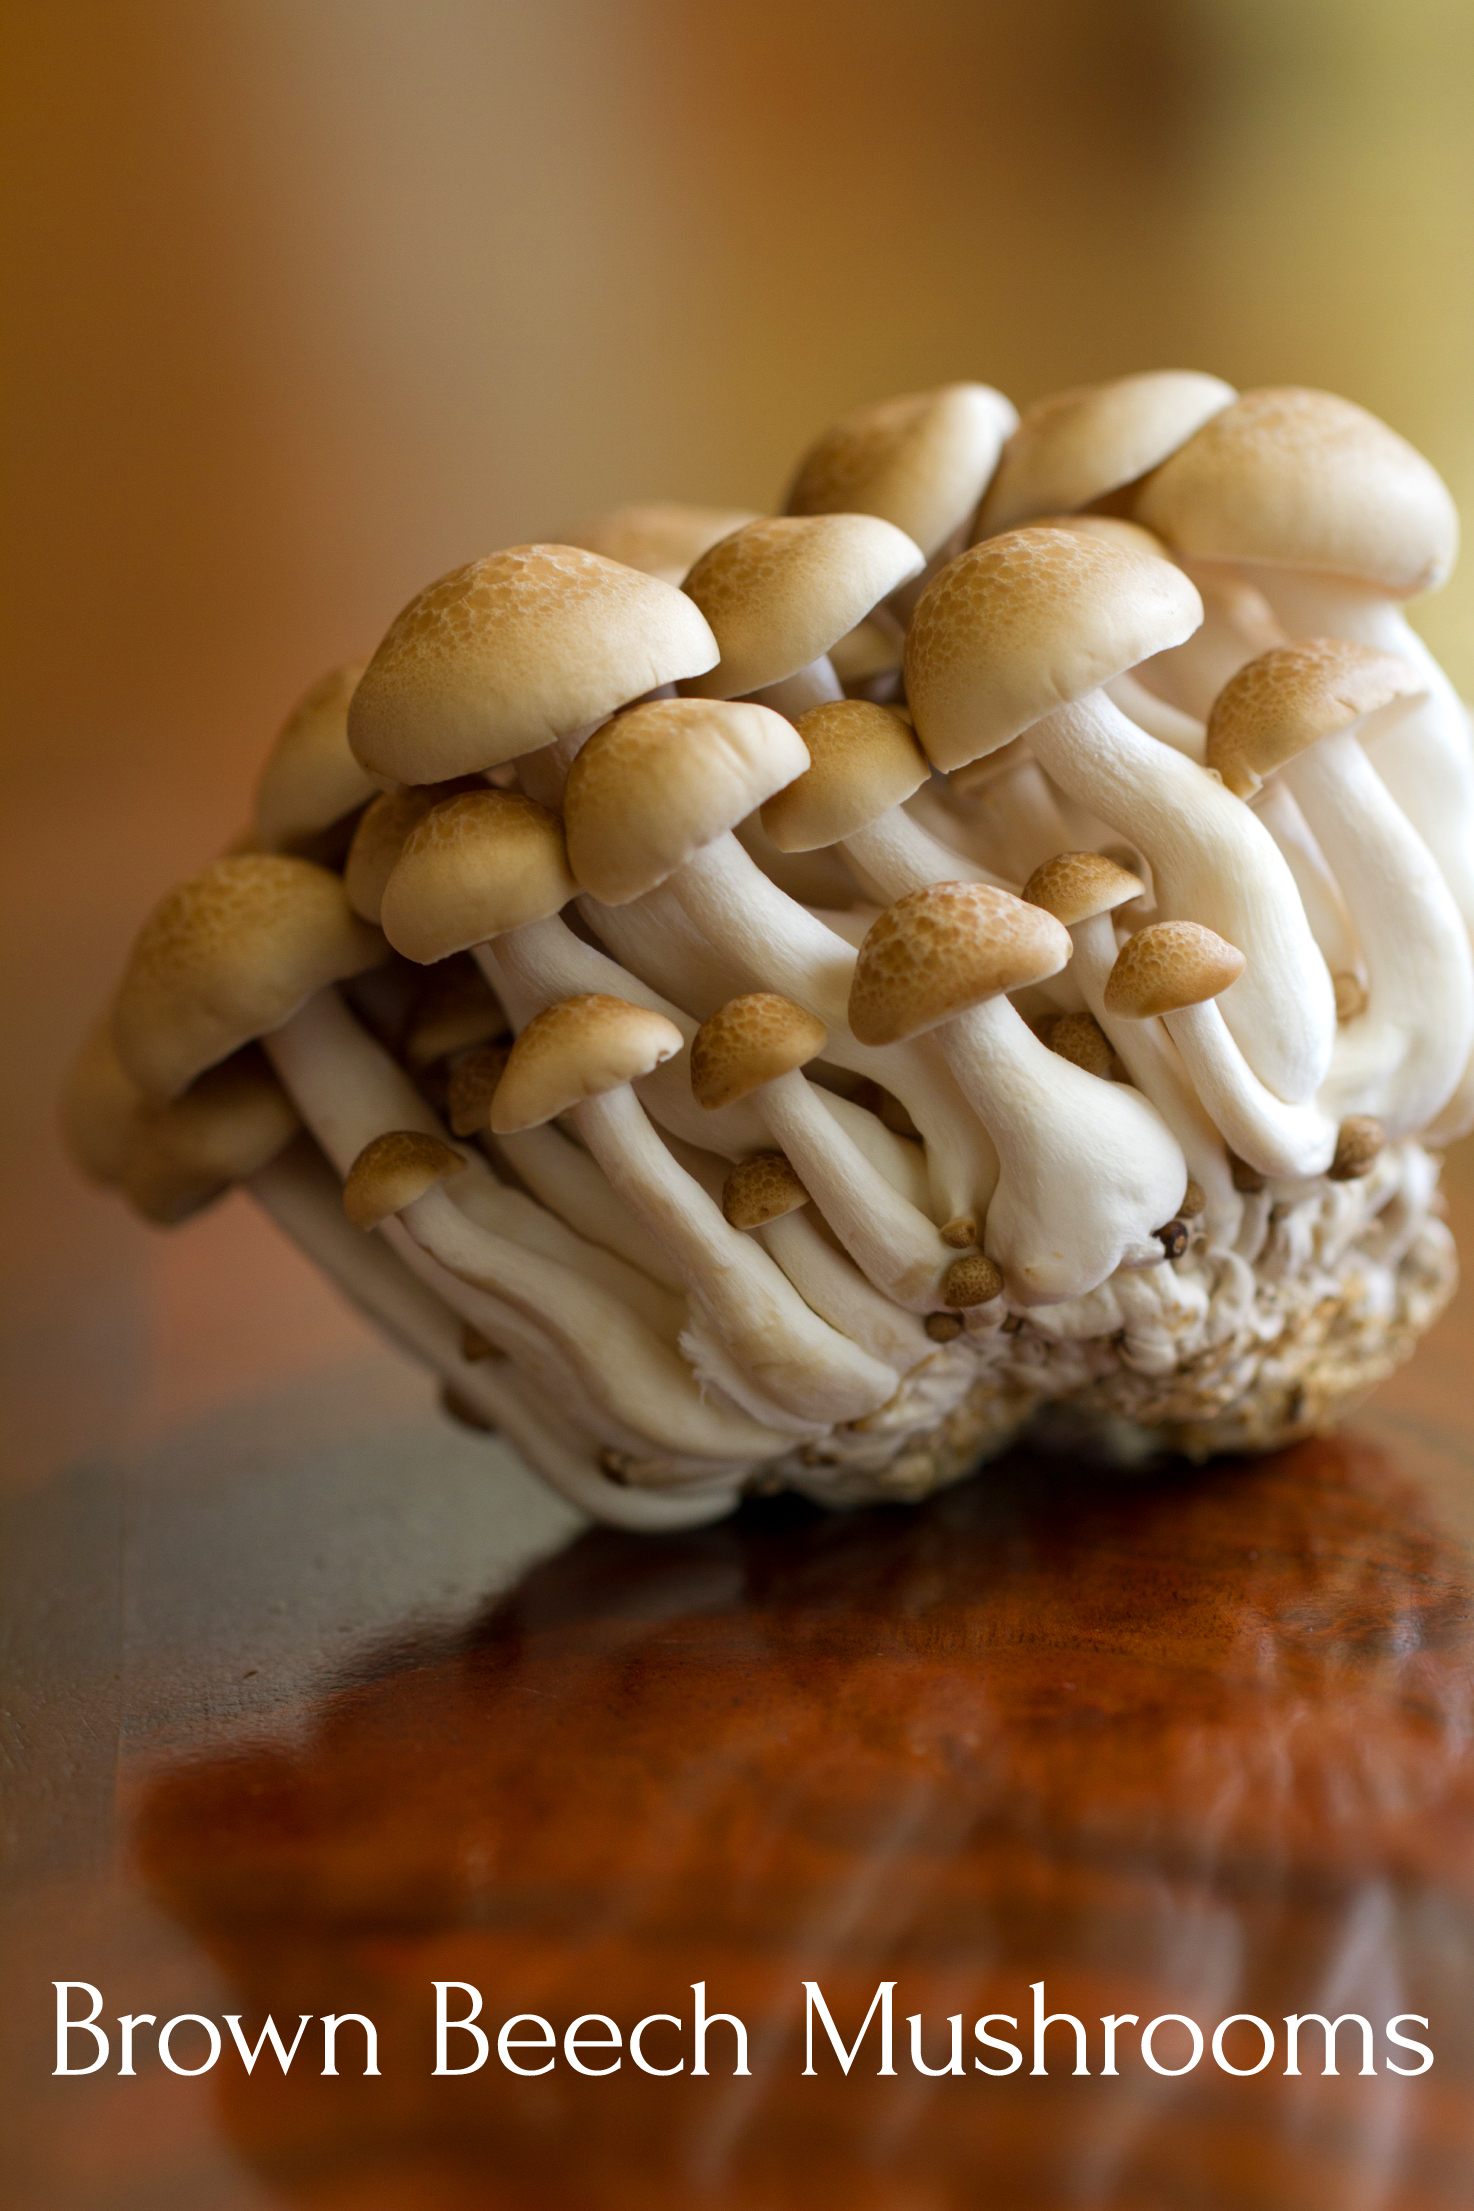 East Asian Brown Beech Mushrooms (also known also as Buna-shimeji, Hypsizigus tessellatus, or Brown Clamshell)